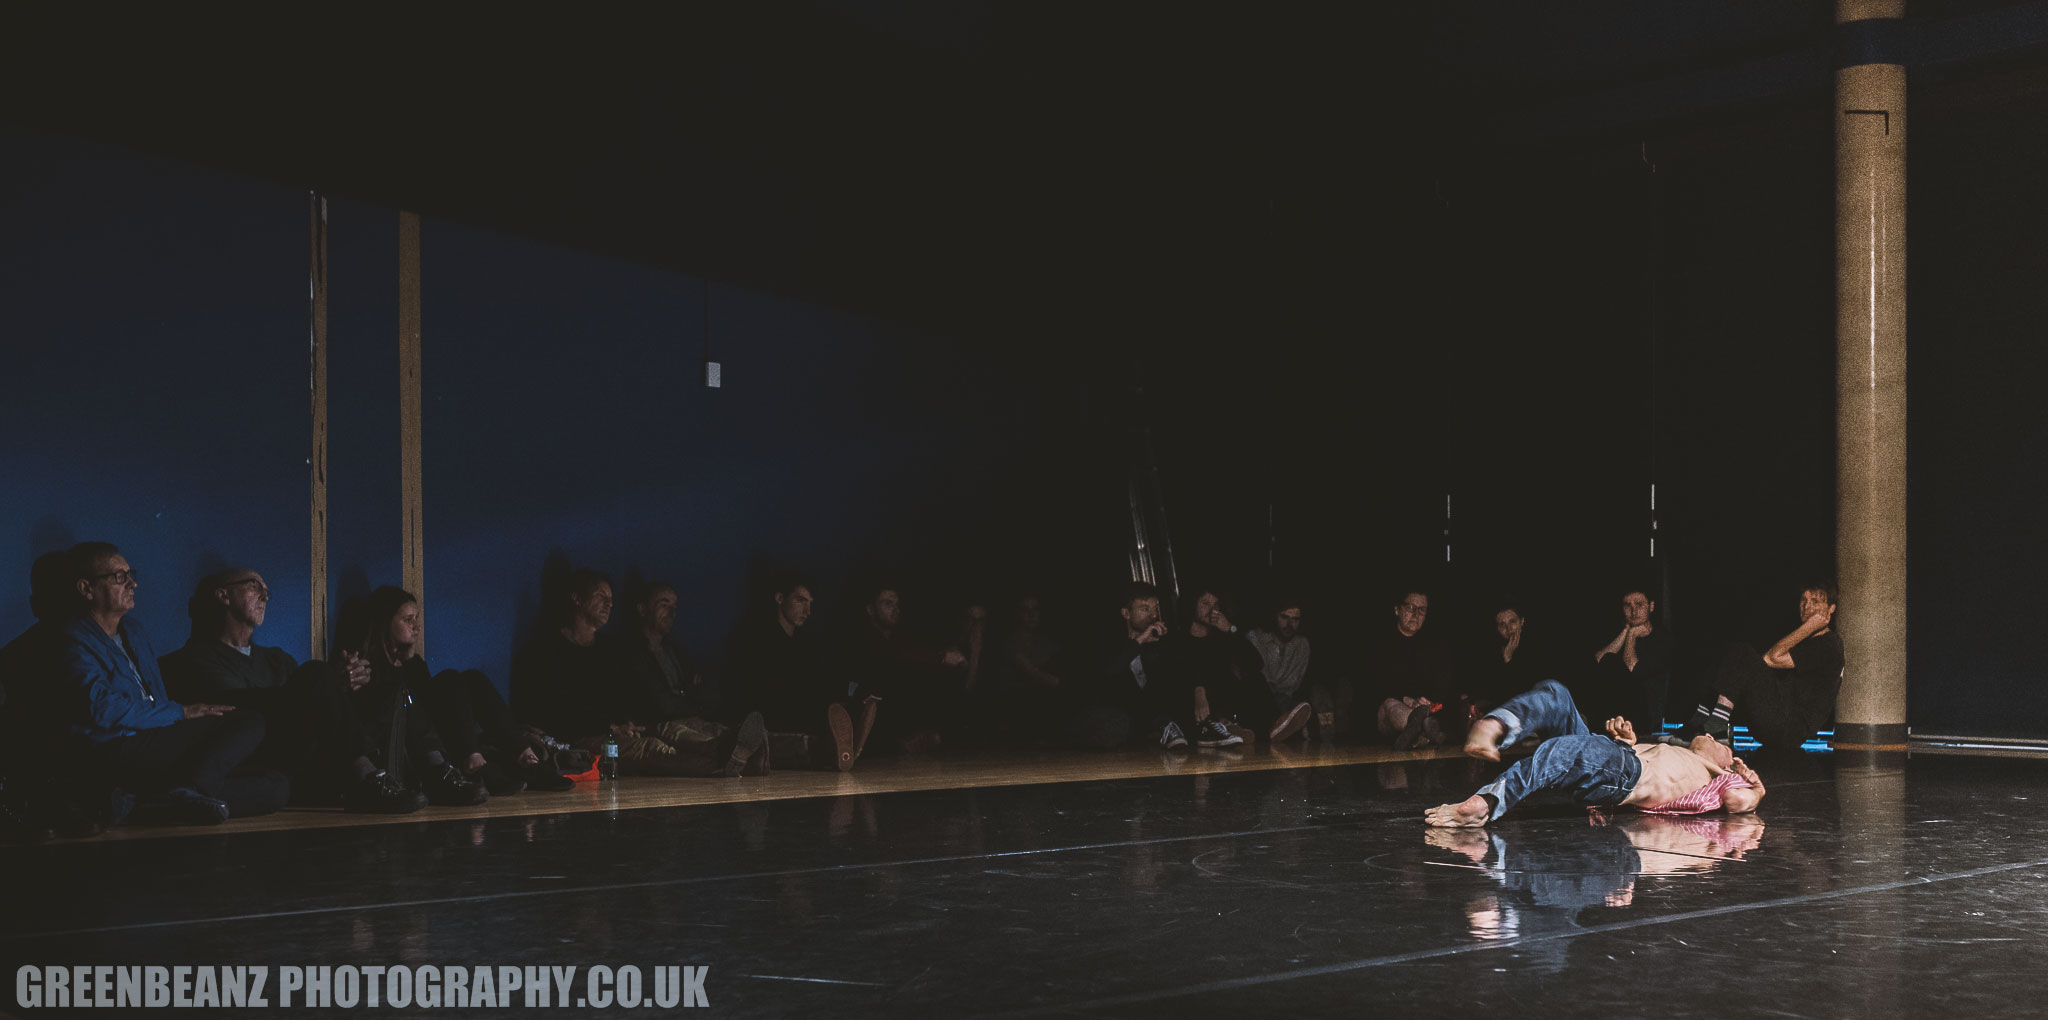 Photograph of Disabled dancer Kevin French in motion UK Dance Photography